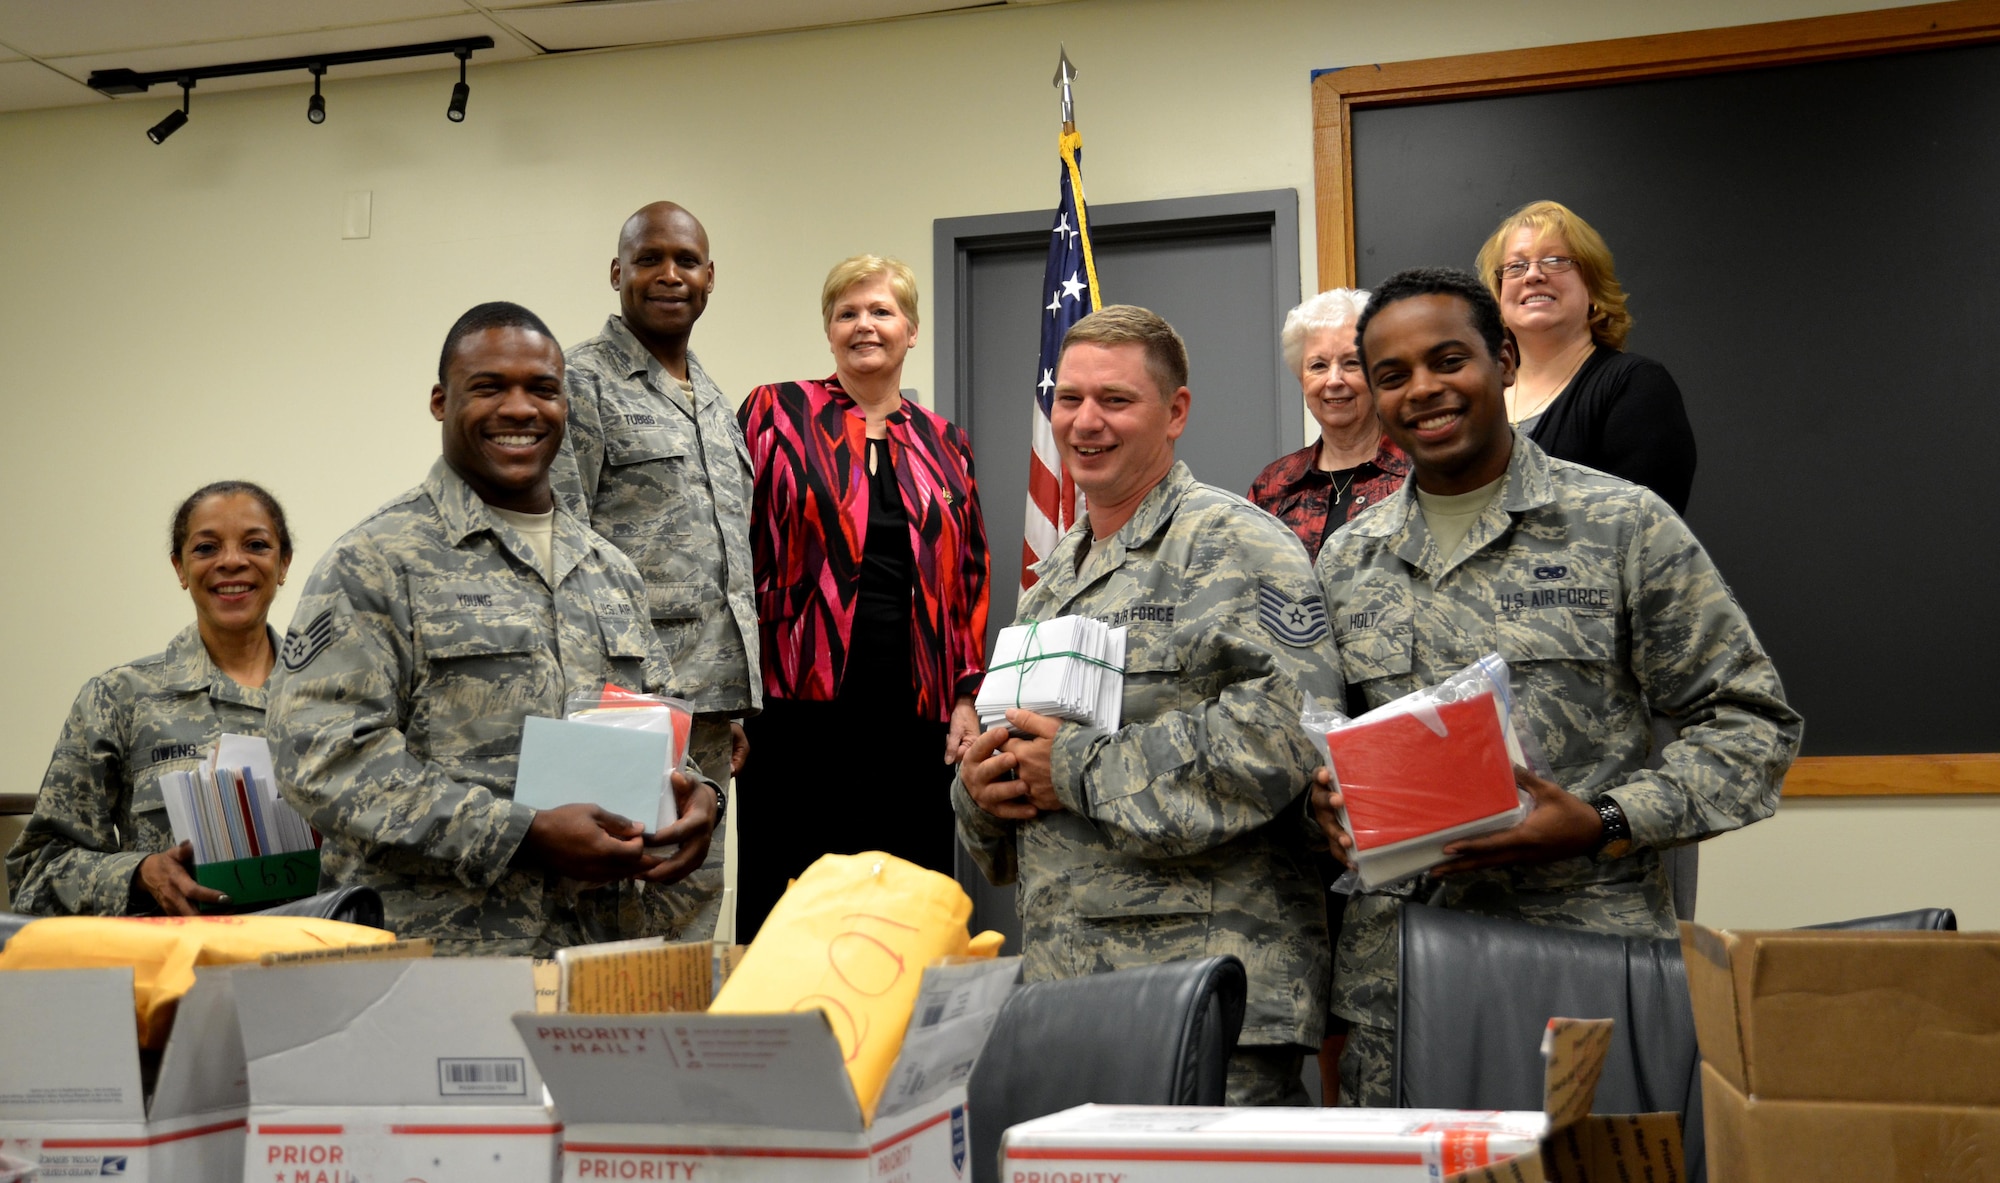 Members of the Order of the Eastern Star Grand Chapter deliver some holiday cheer to deployed troops by donating cards to Airmen at Dobbins Air Reserve Base, Georgia on October 25, 2016. The Eastern Stars gave over 10,000 cards to be sent to troops that may not be in the company of family this holiday. (U.S. Air Force photo by Senior Airman Lauren Douglas)